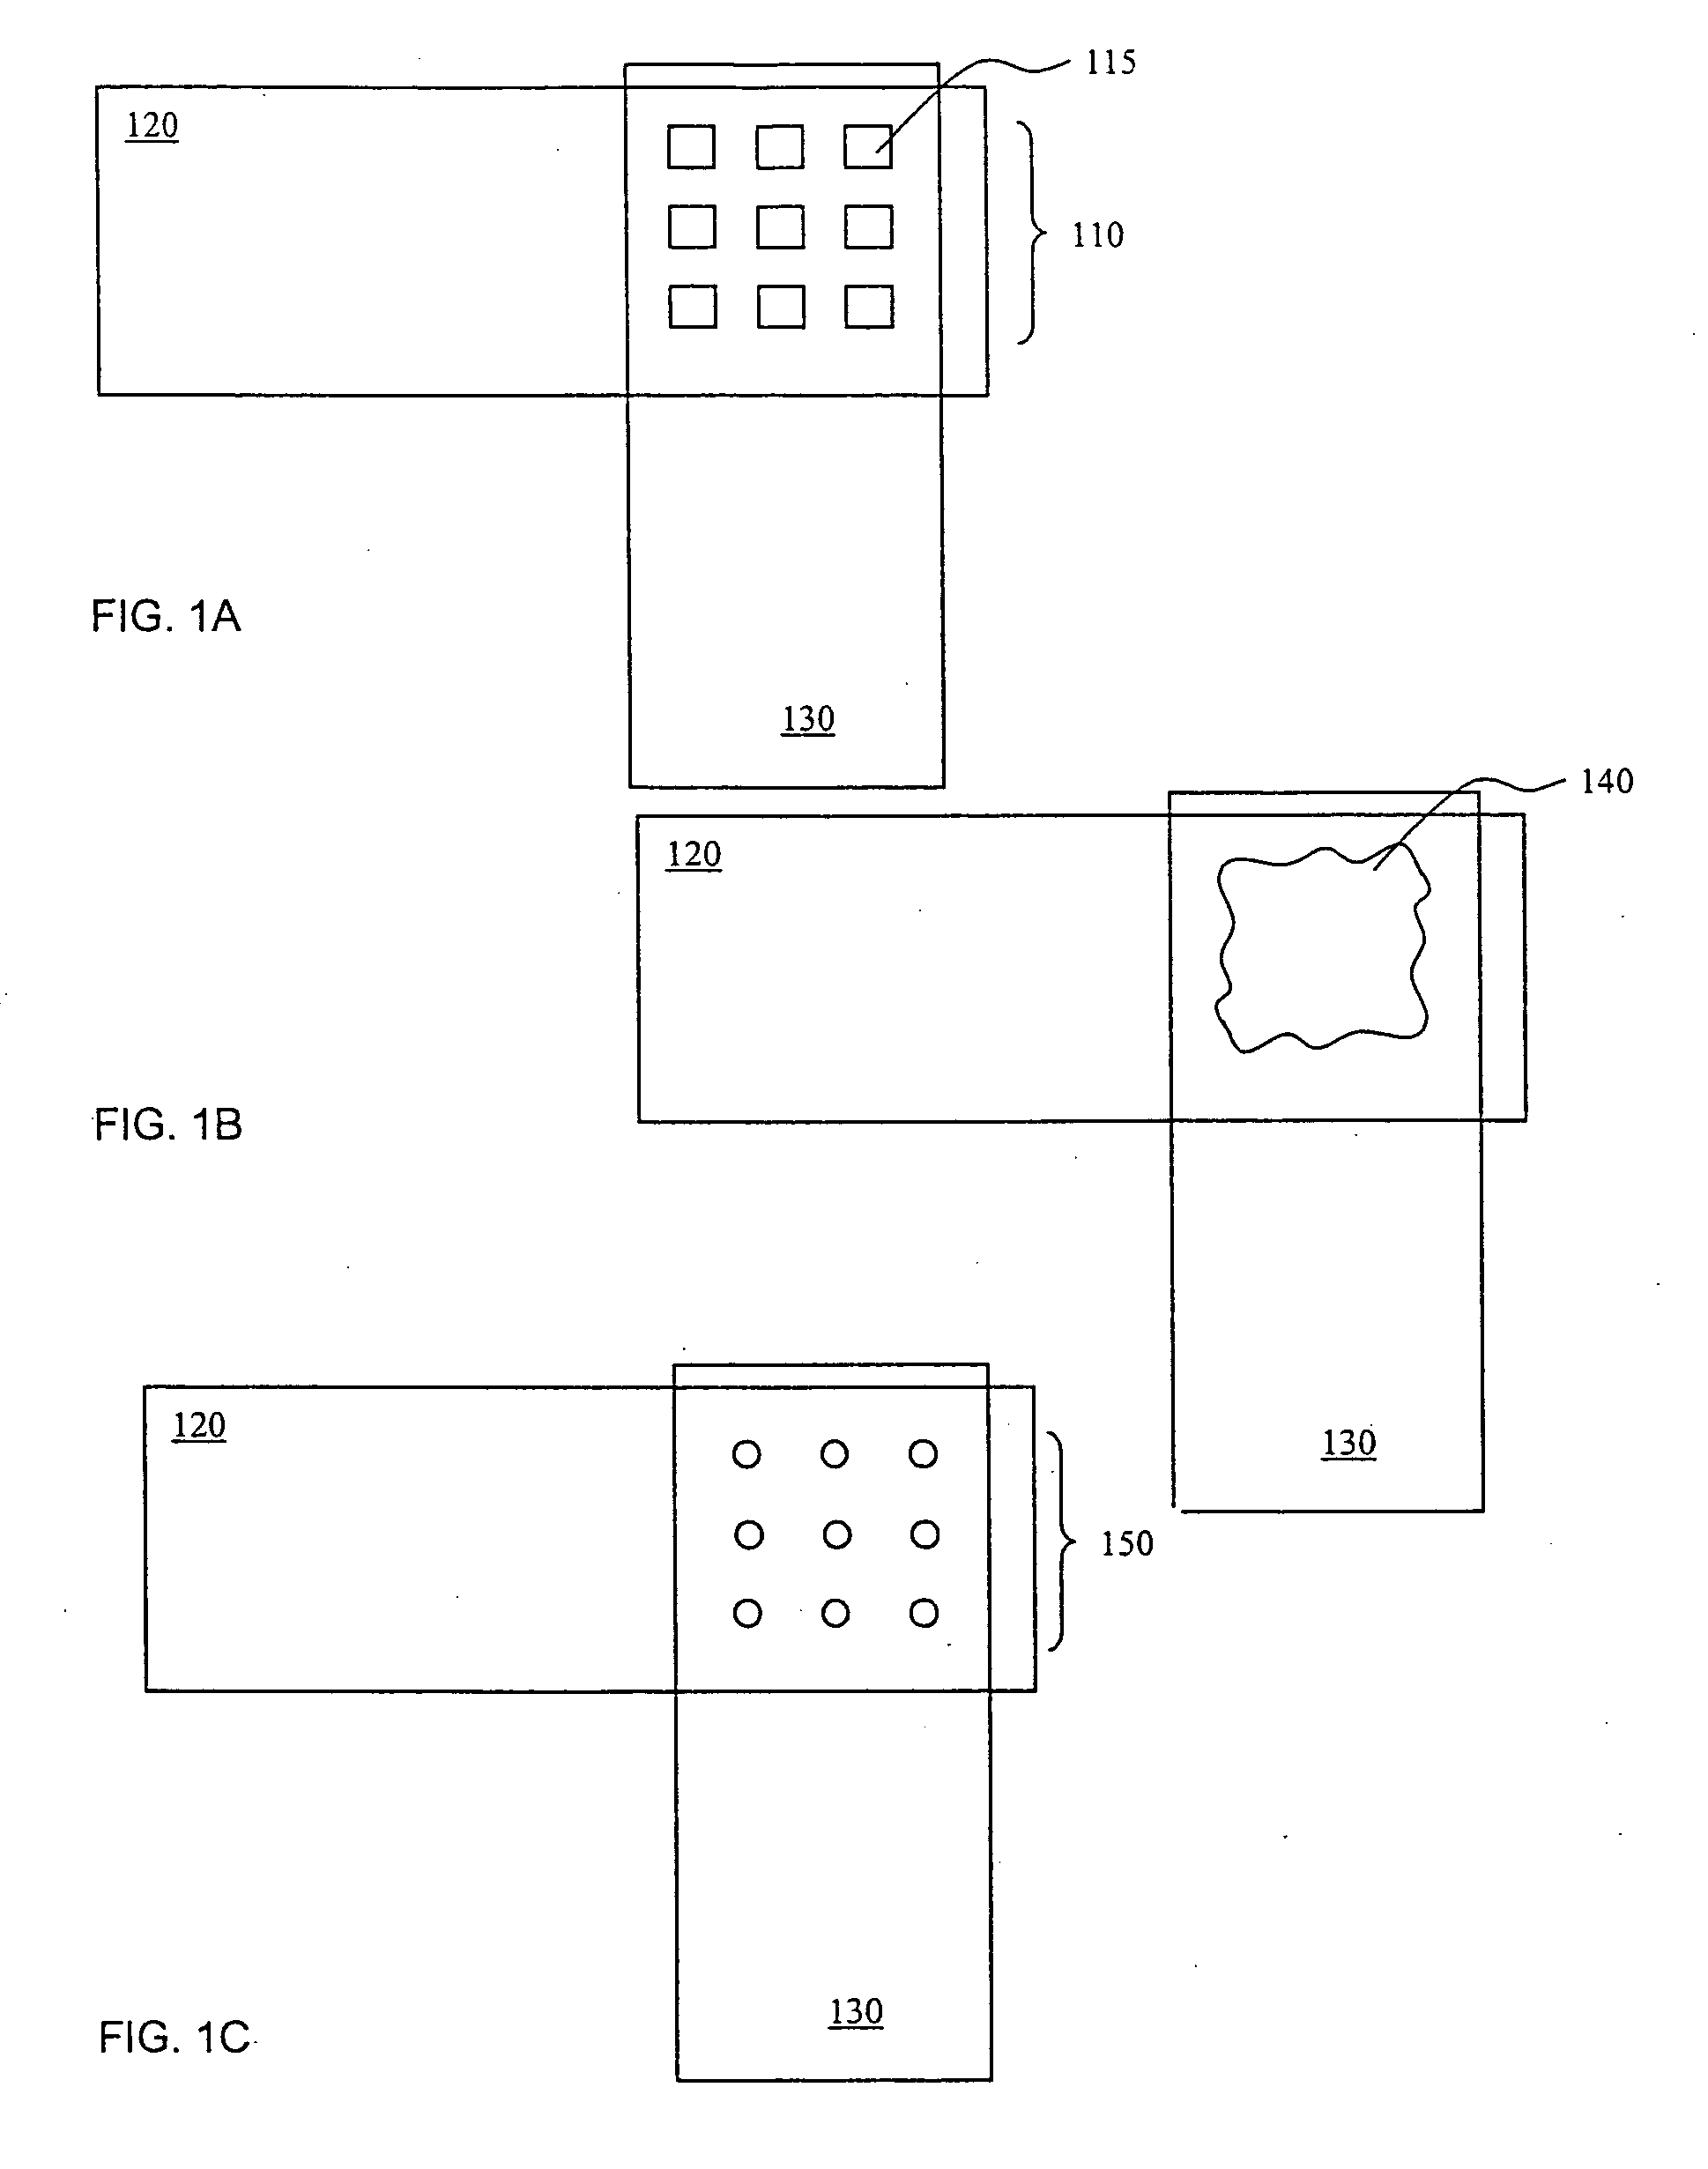 Resolution enhancing technology using phase assignment bridges